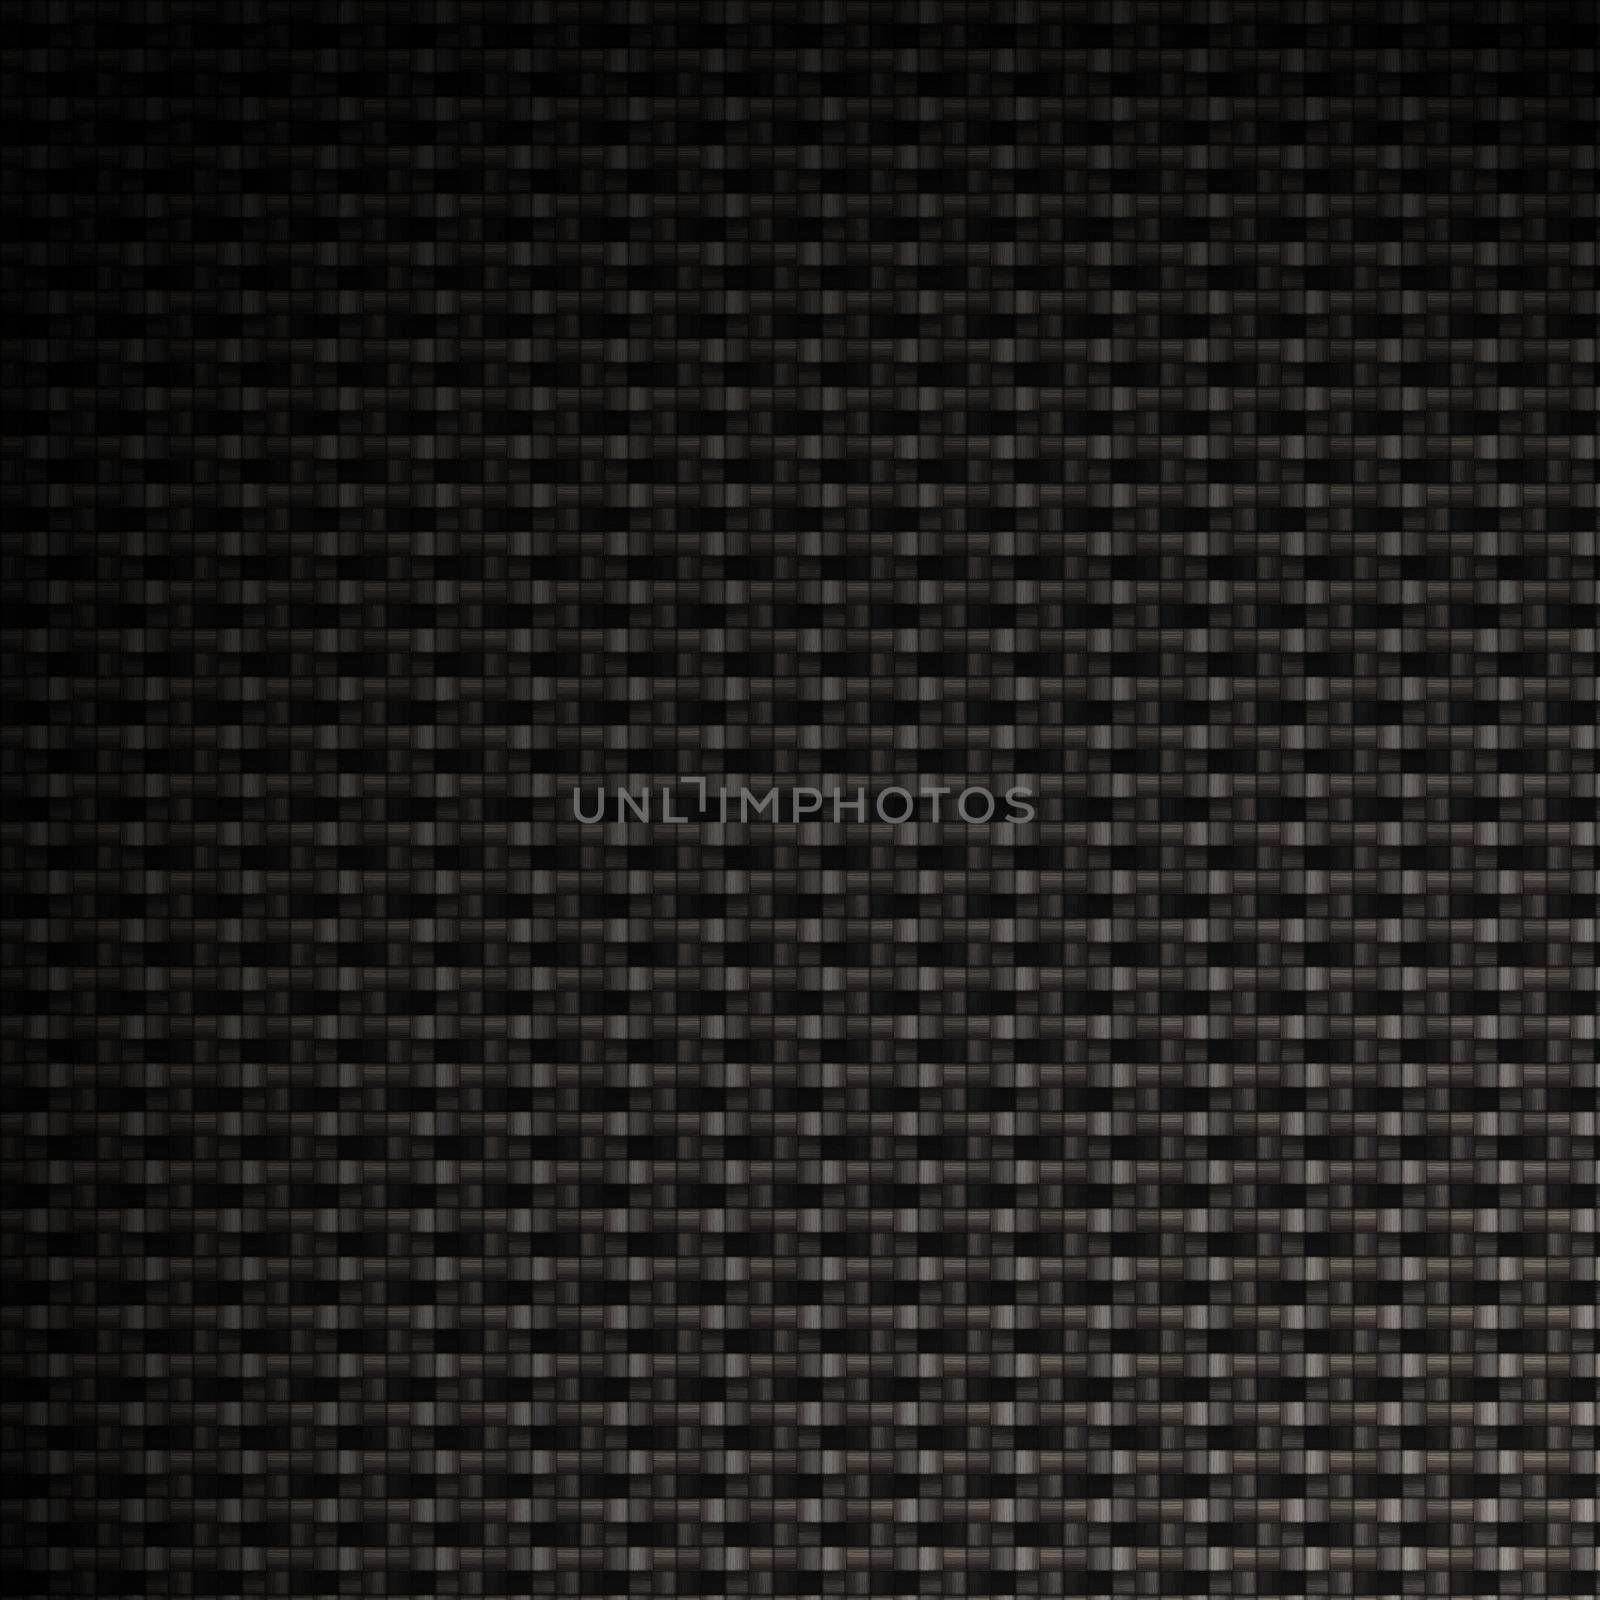 A tightly woven carbon fiber background texture - a great and highly-usable art element for that "high-tech" look you are going for in your print or web design piece. 